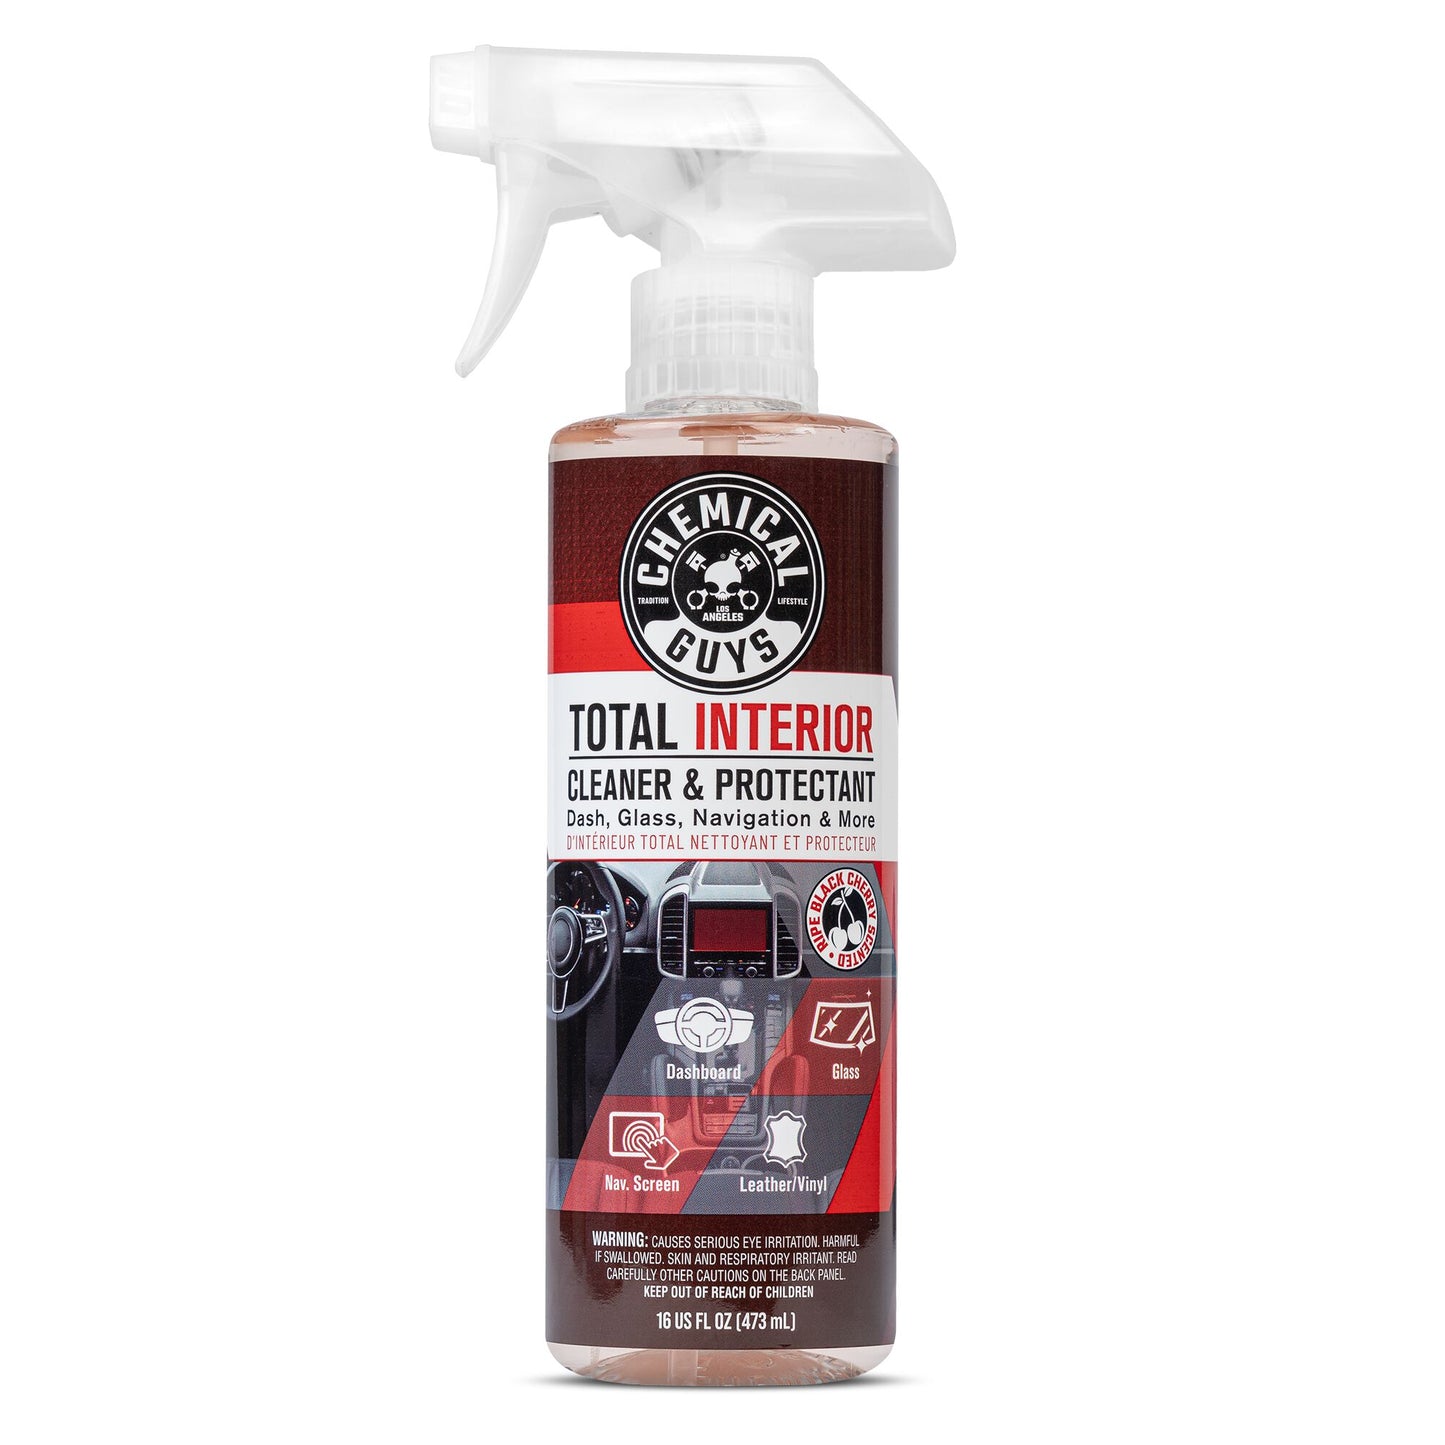 Leather & Fabric Interior Cleaner Deluxe Kit